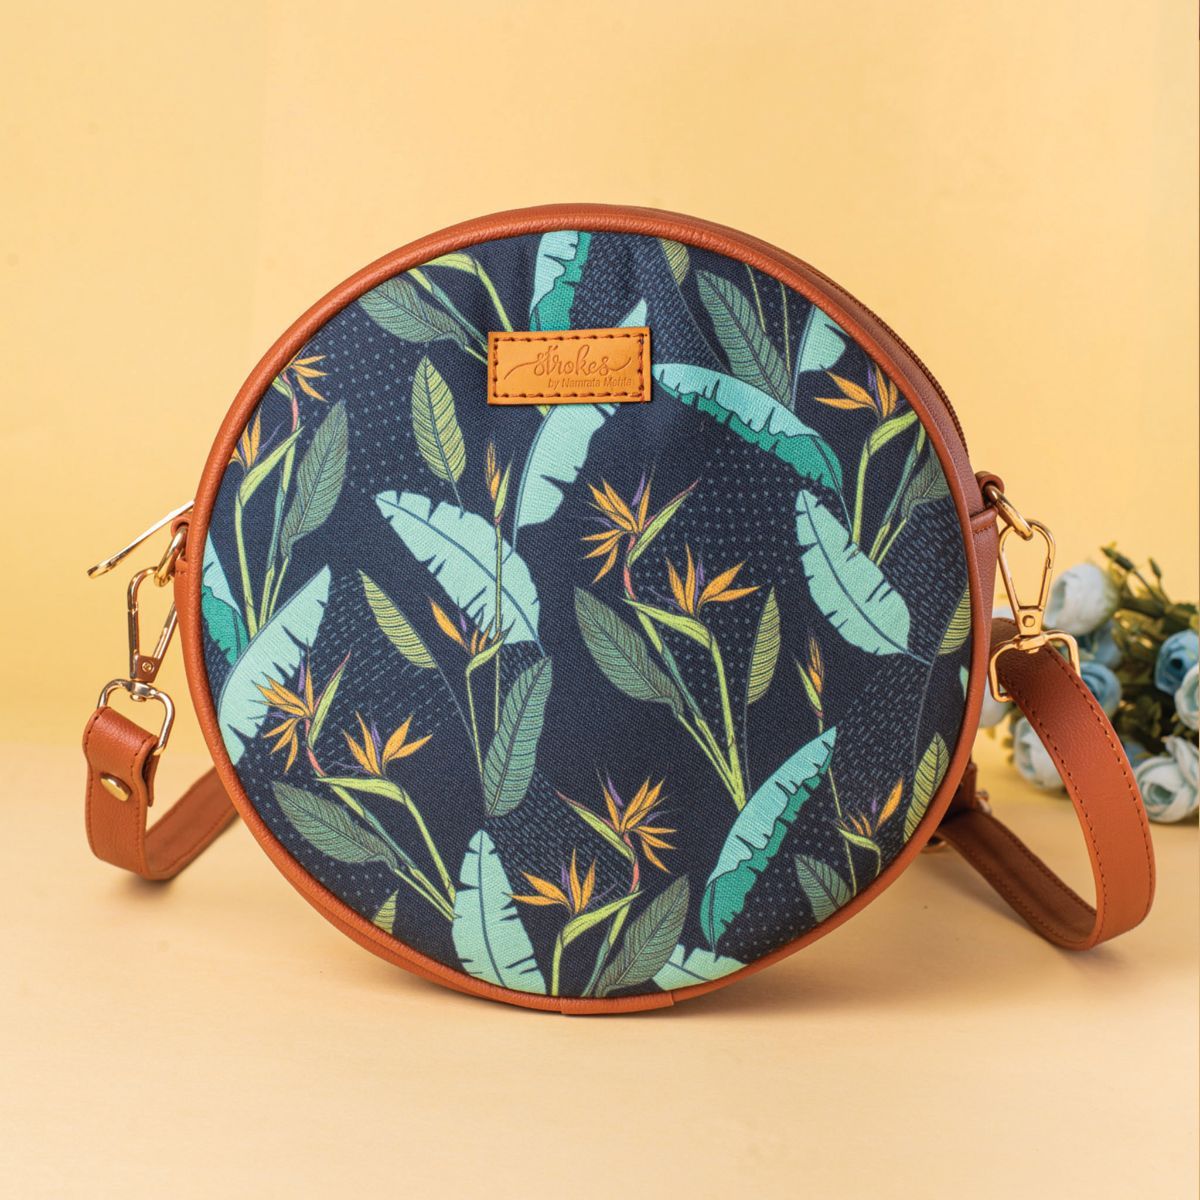 Buy Strokes by Namrata Mehta Women's Tote Bag | Vegan Leather & Cotton  Canvas | Floral Printed (Blue Baby Breaths) at Amazon.in